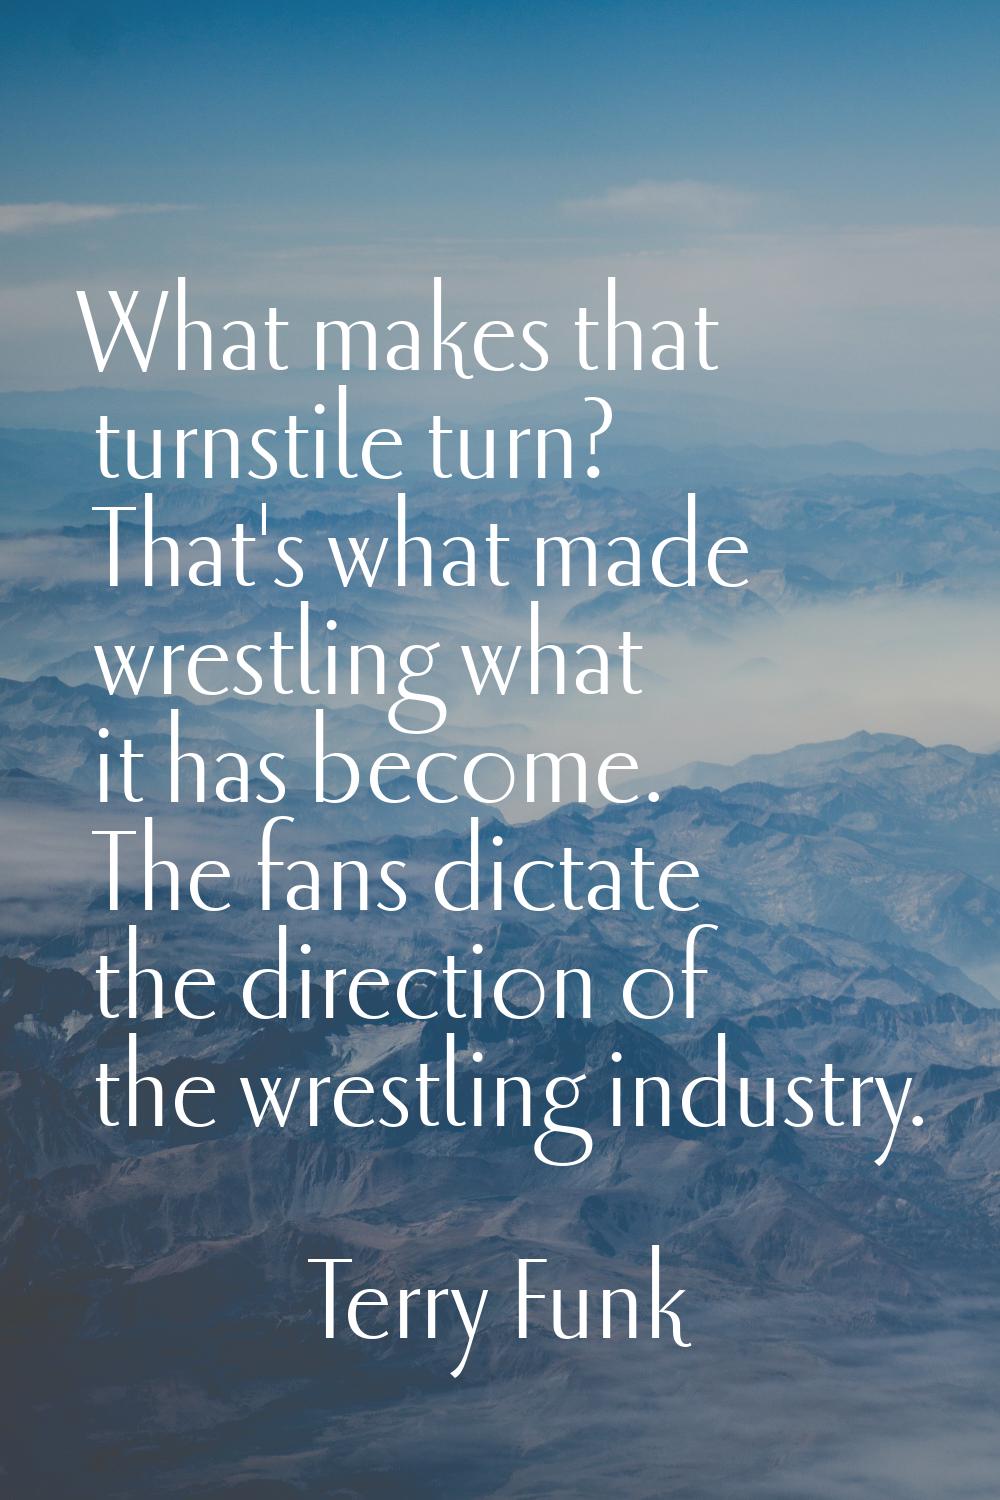 What makes that turnstile turn? That's what made wrestling what it has become. The fans dictate the